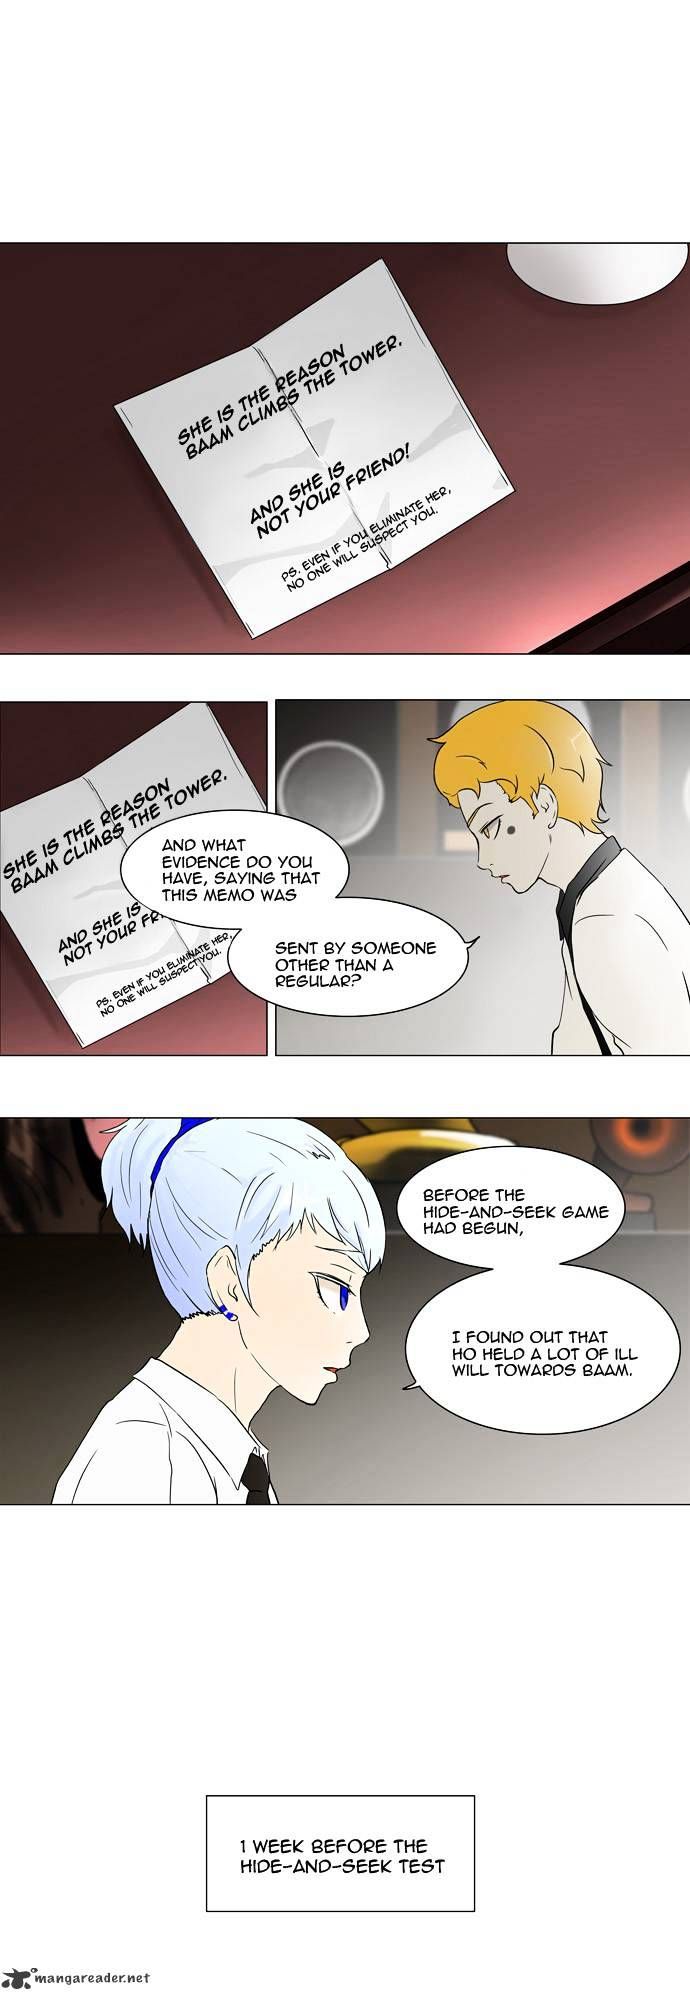 Tower of God Chapter 55 page 6